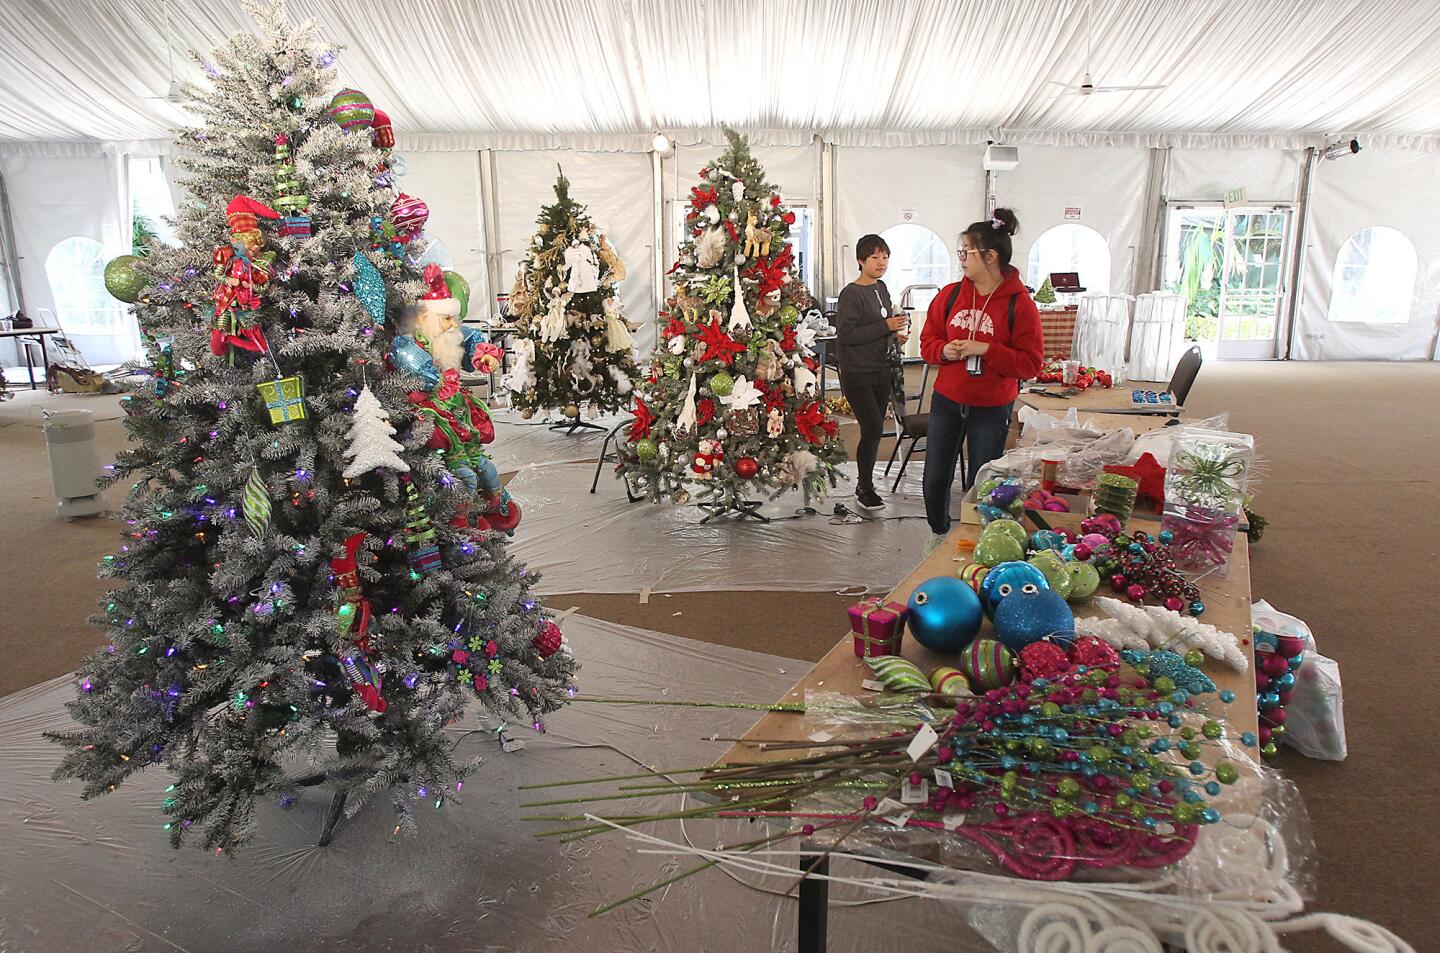 South County Outreach's Festival of Trees